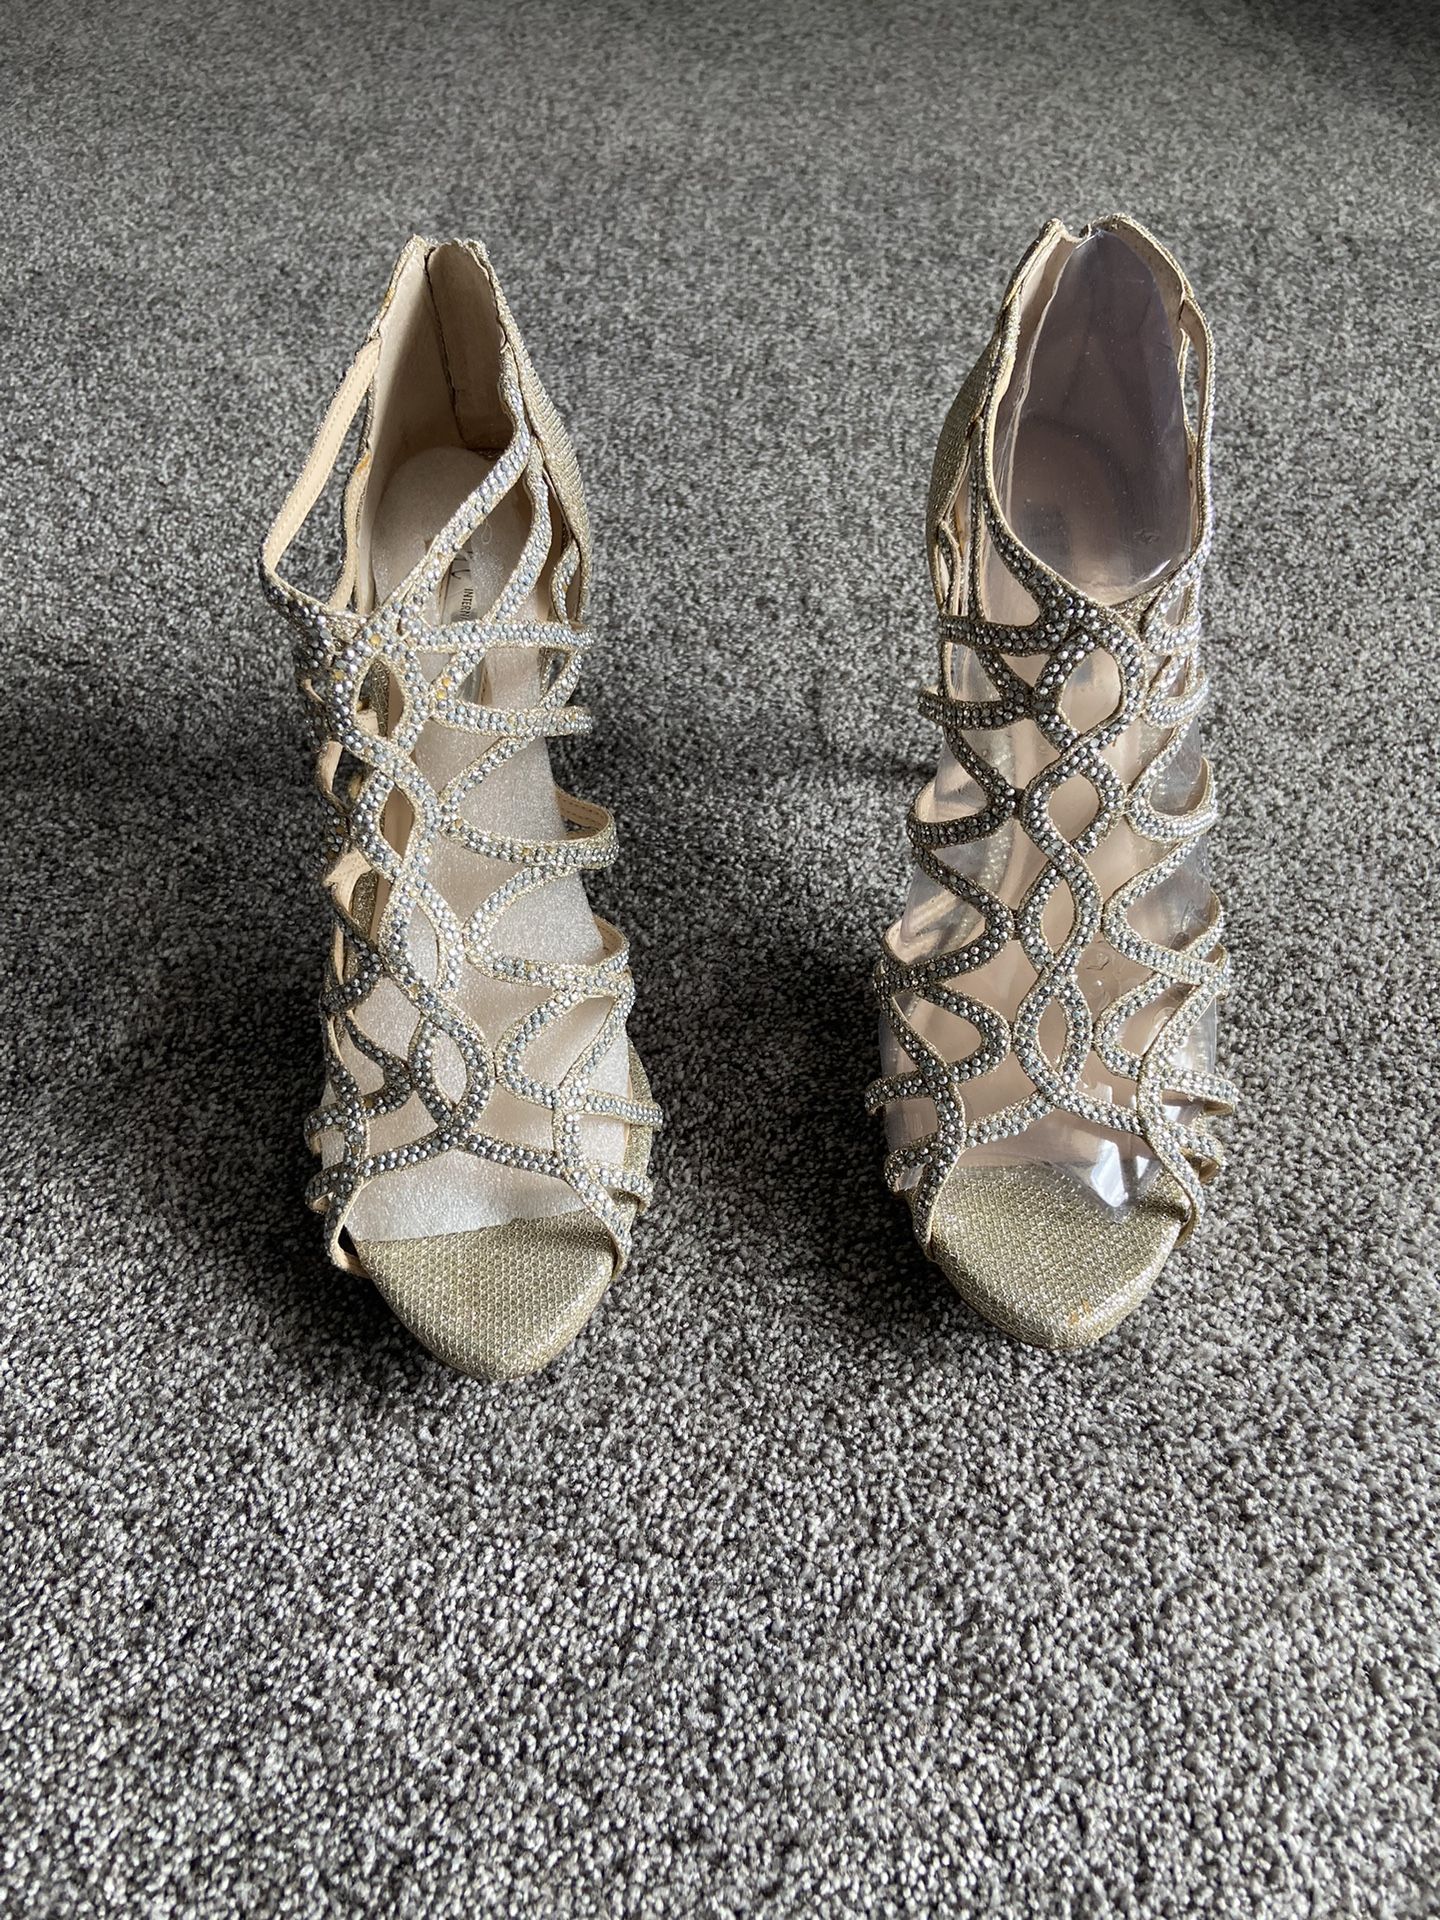 Womens Spiked Heels 4’ Size 9 1/2